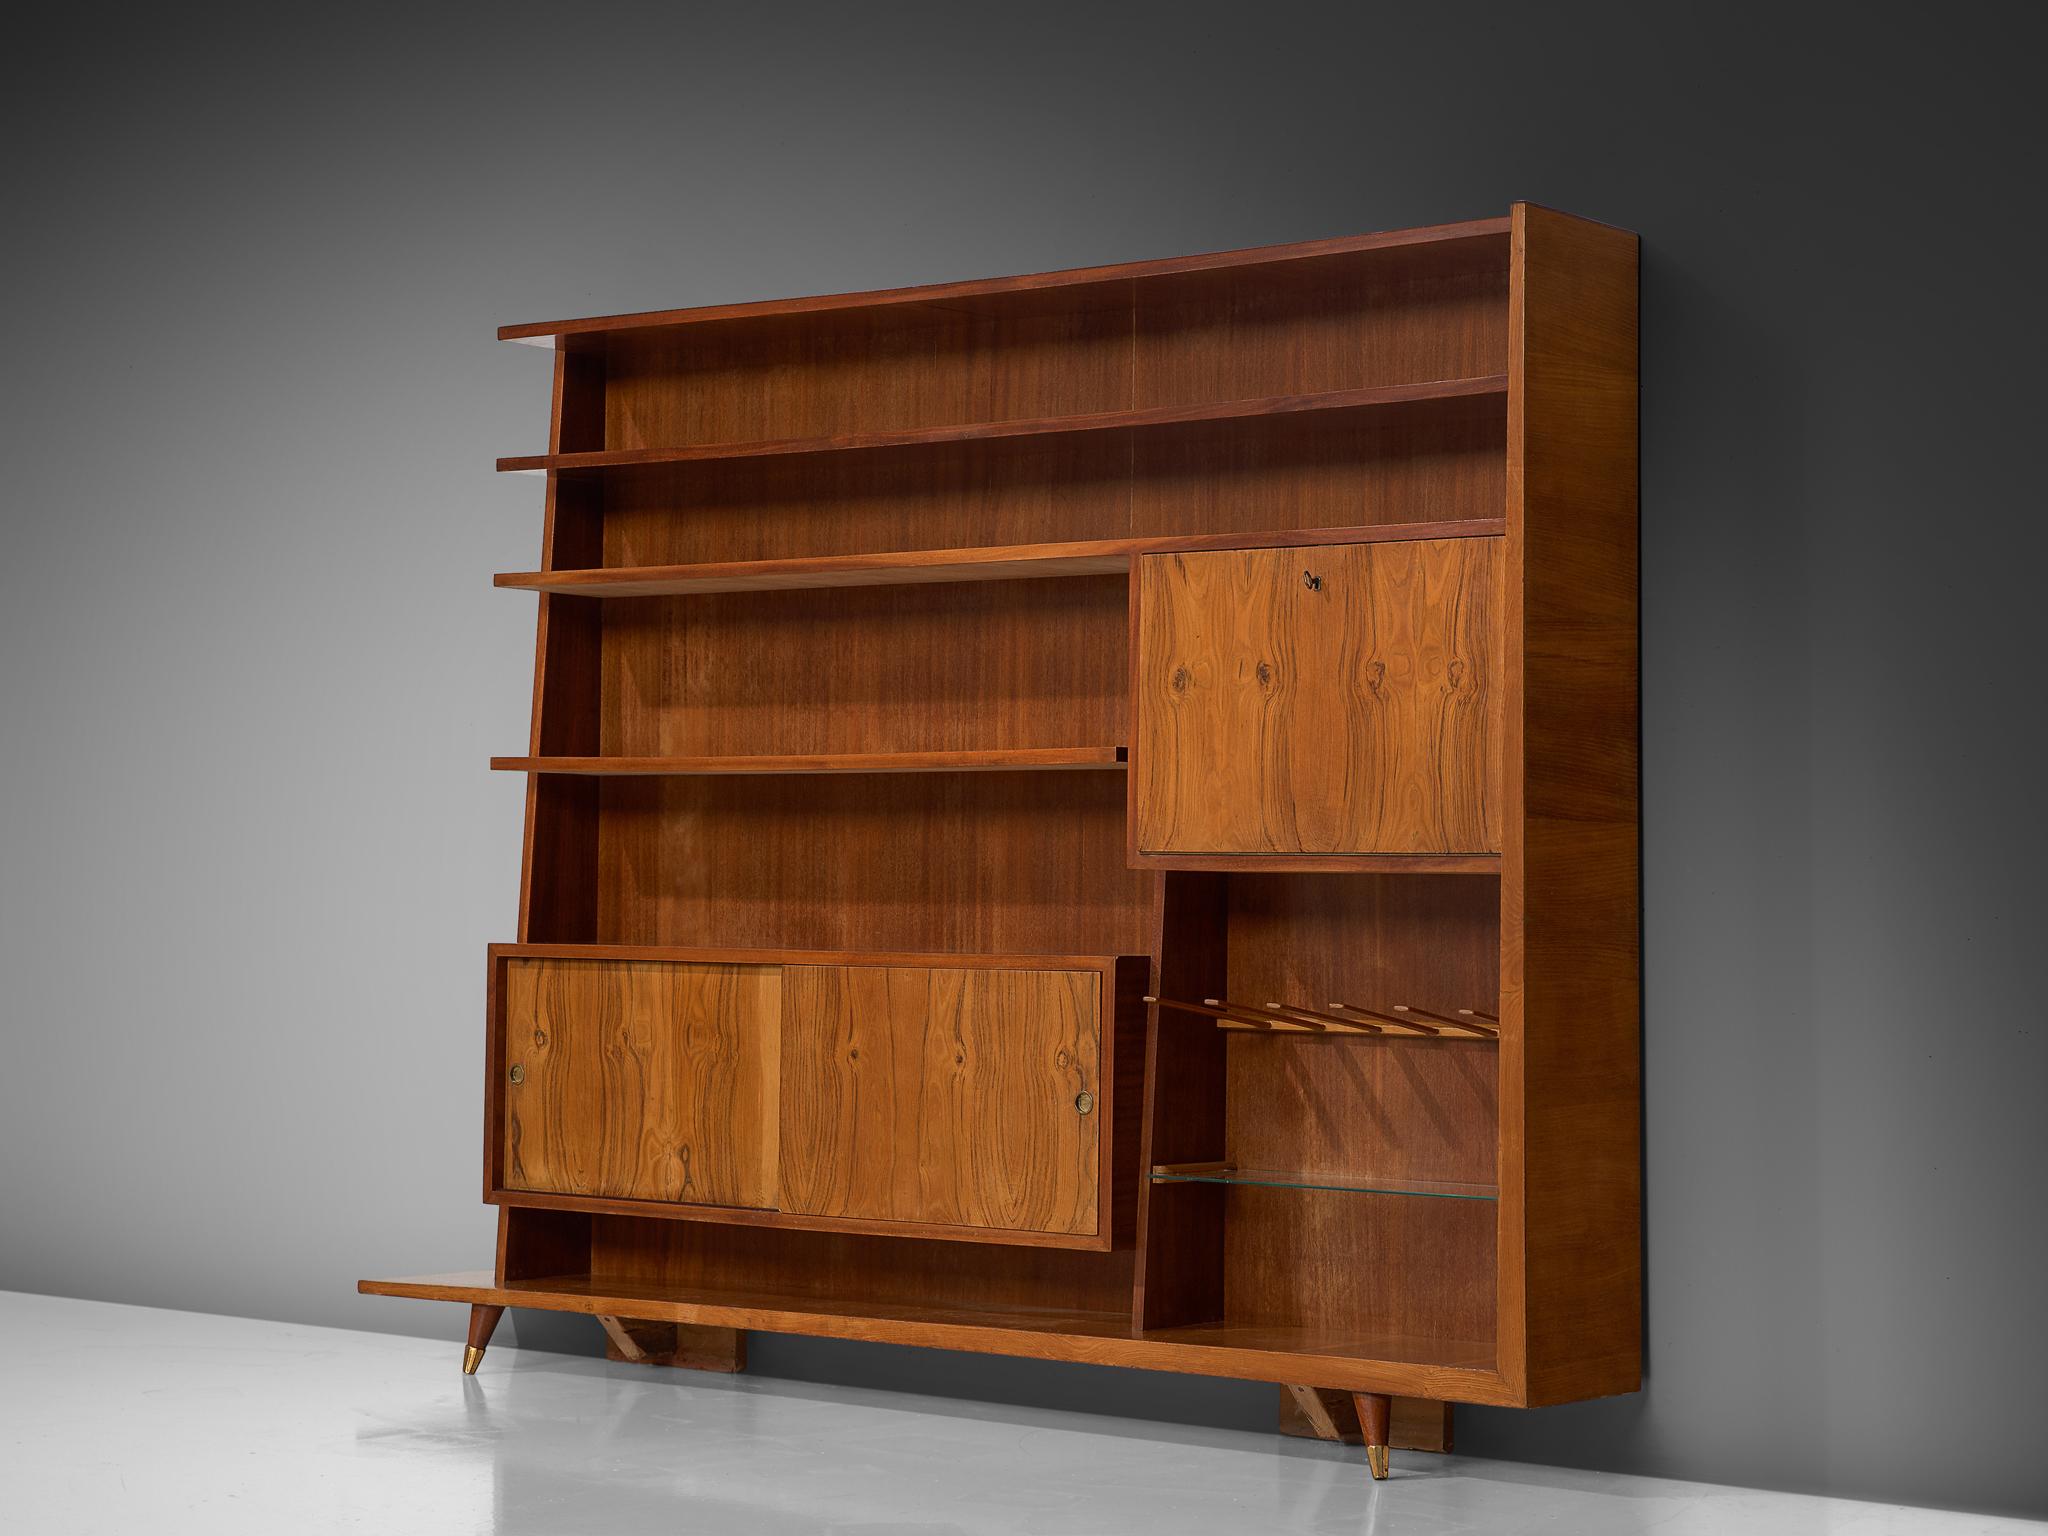 Bookcase, oak, walnut, brass and glass, Italy, circa 1950.

This sophisticated, large bookcase designed in Italy comes in a great size. With a nice variety of storage compartment and shelves, this pieces offers plenty of storage space and options